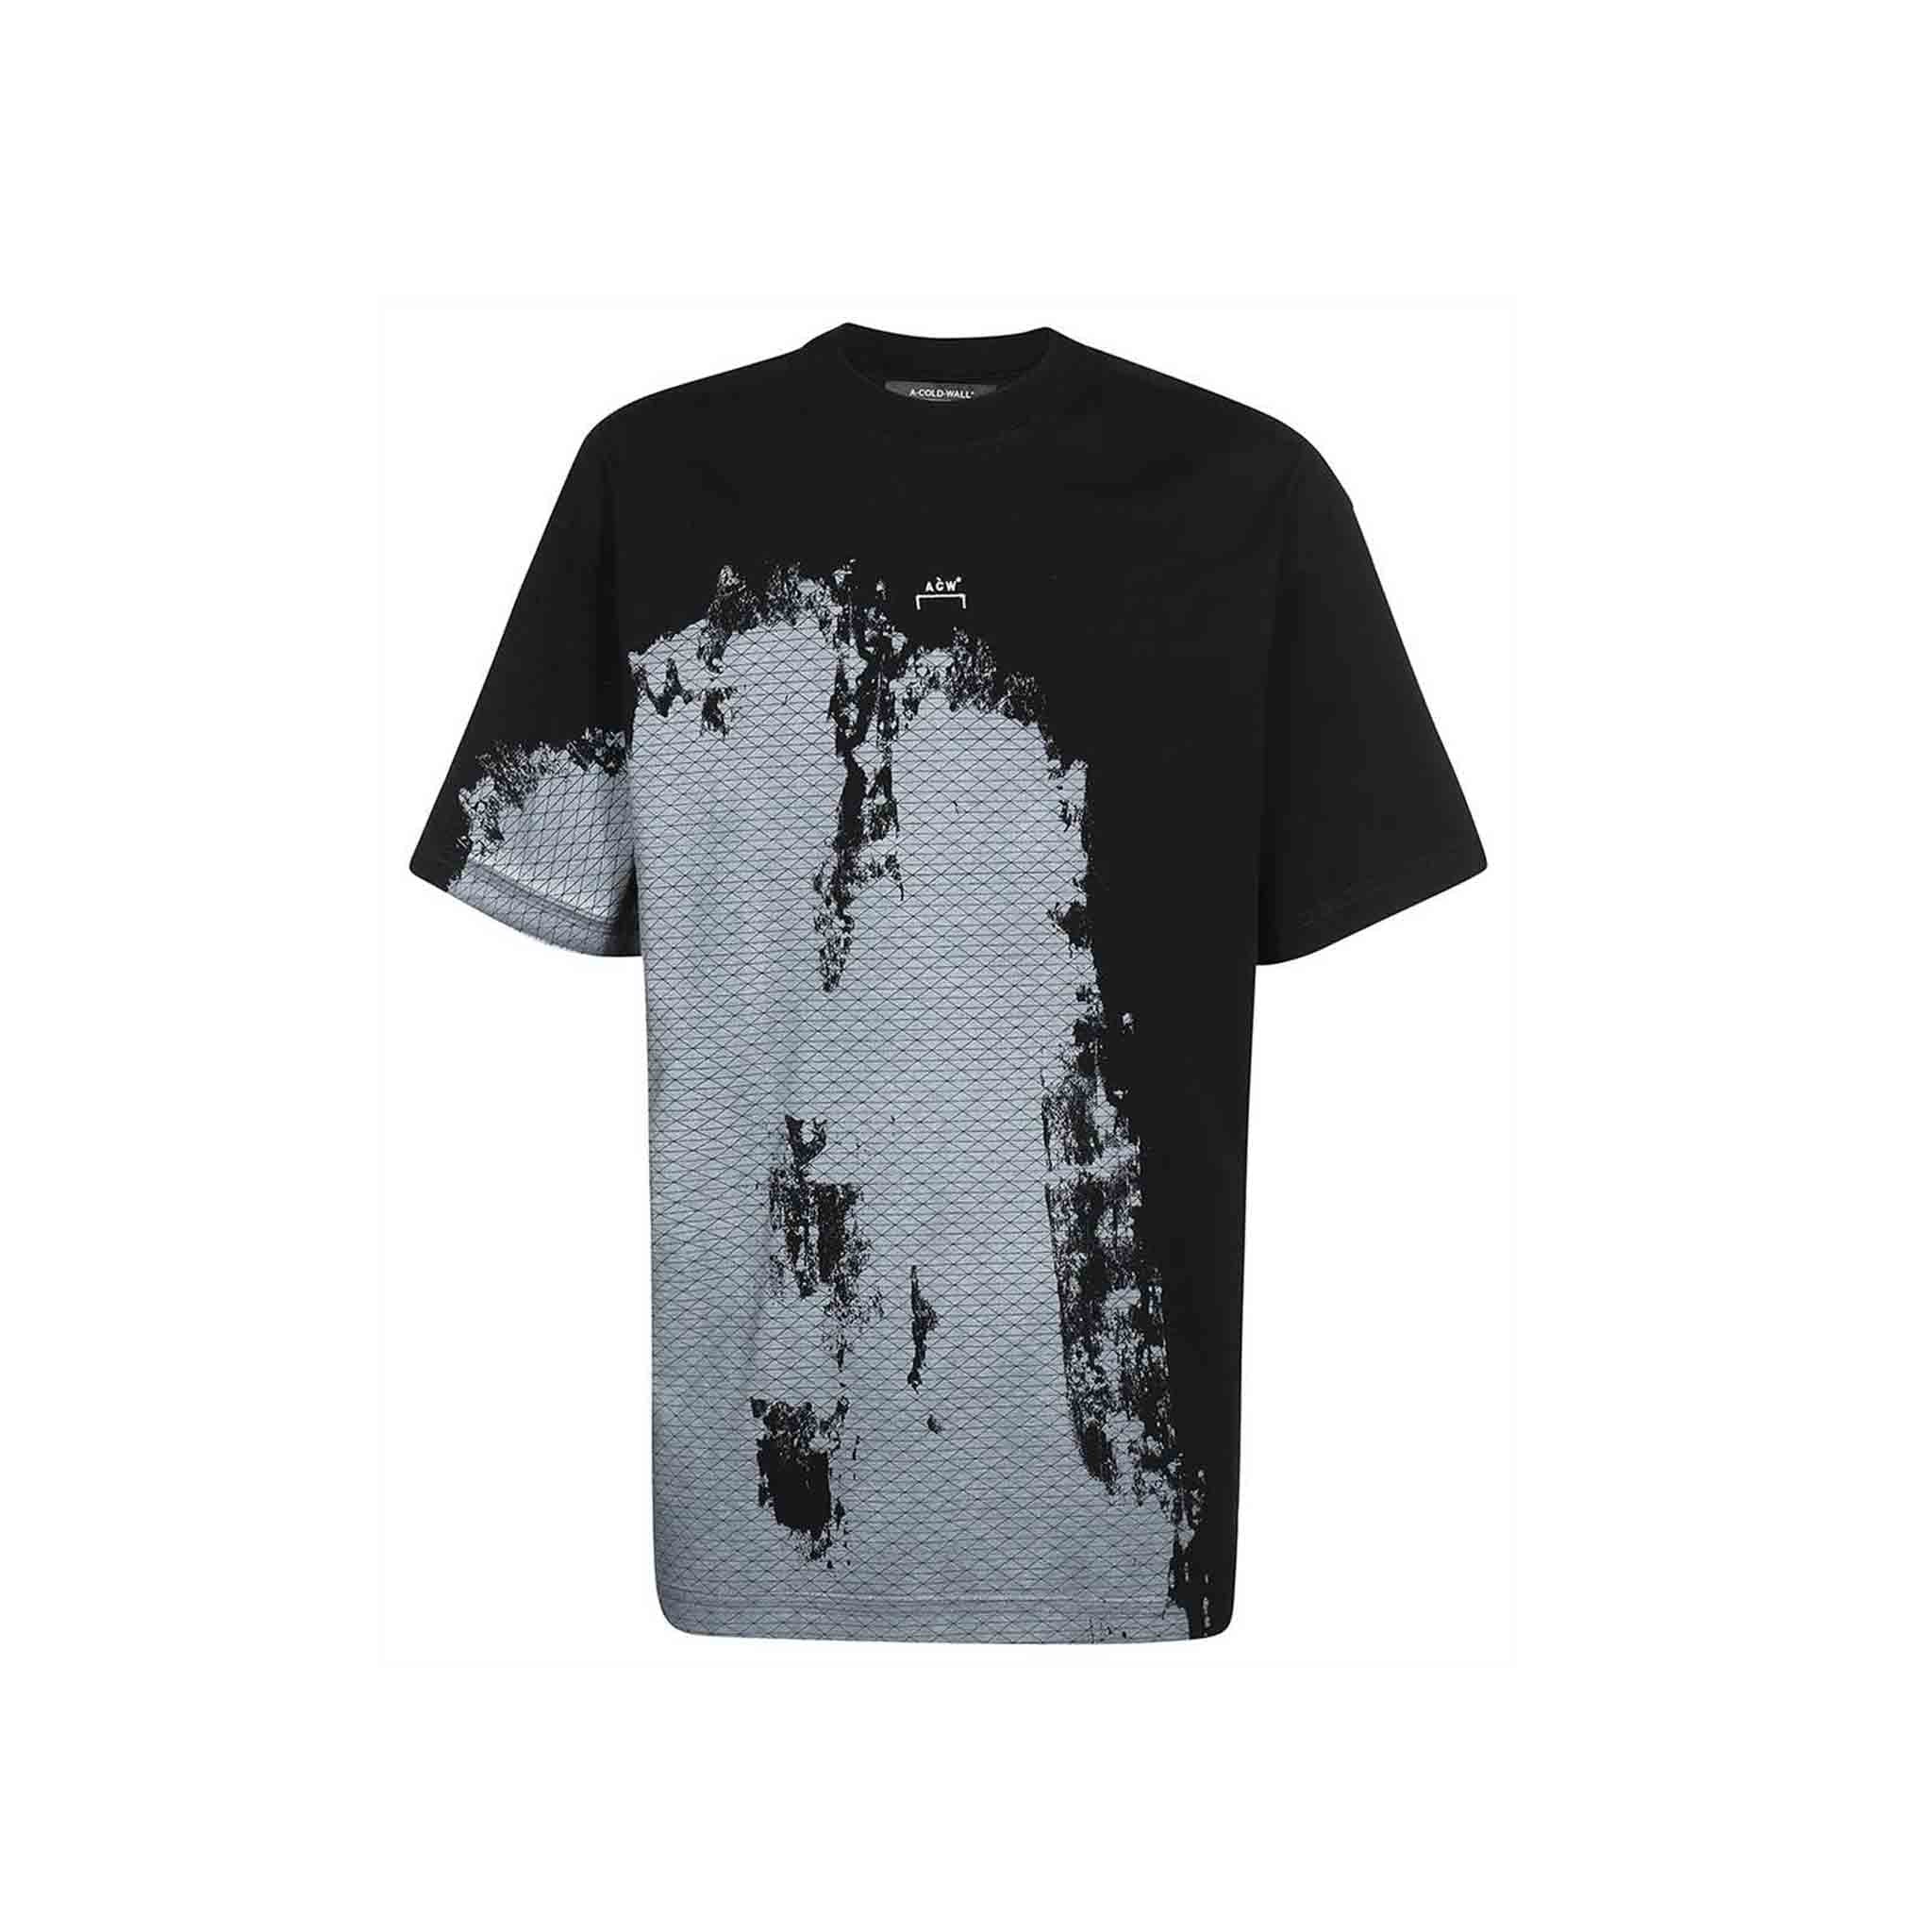 A-COLD-WALL* Brushstroke T-shirt in Black